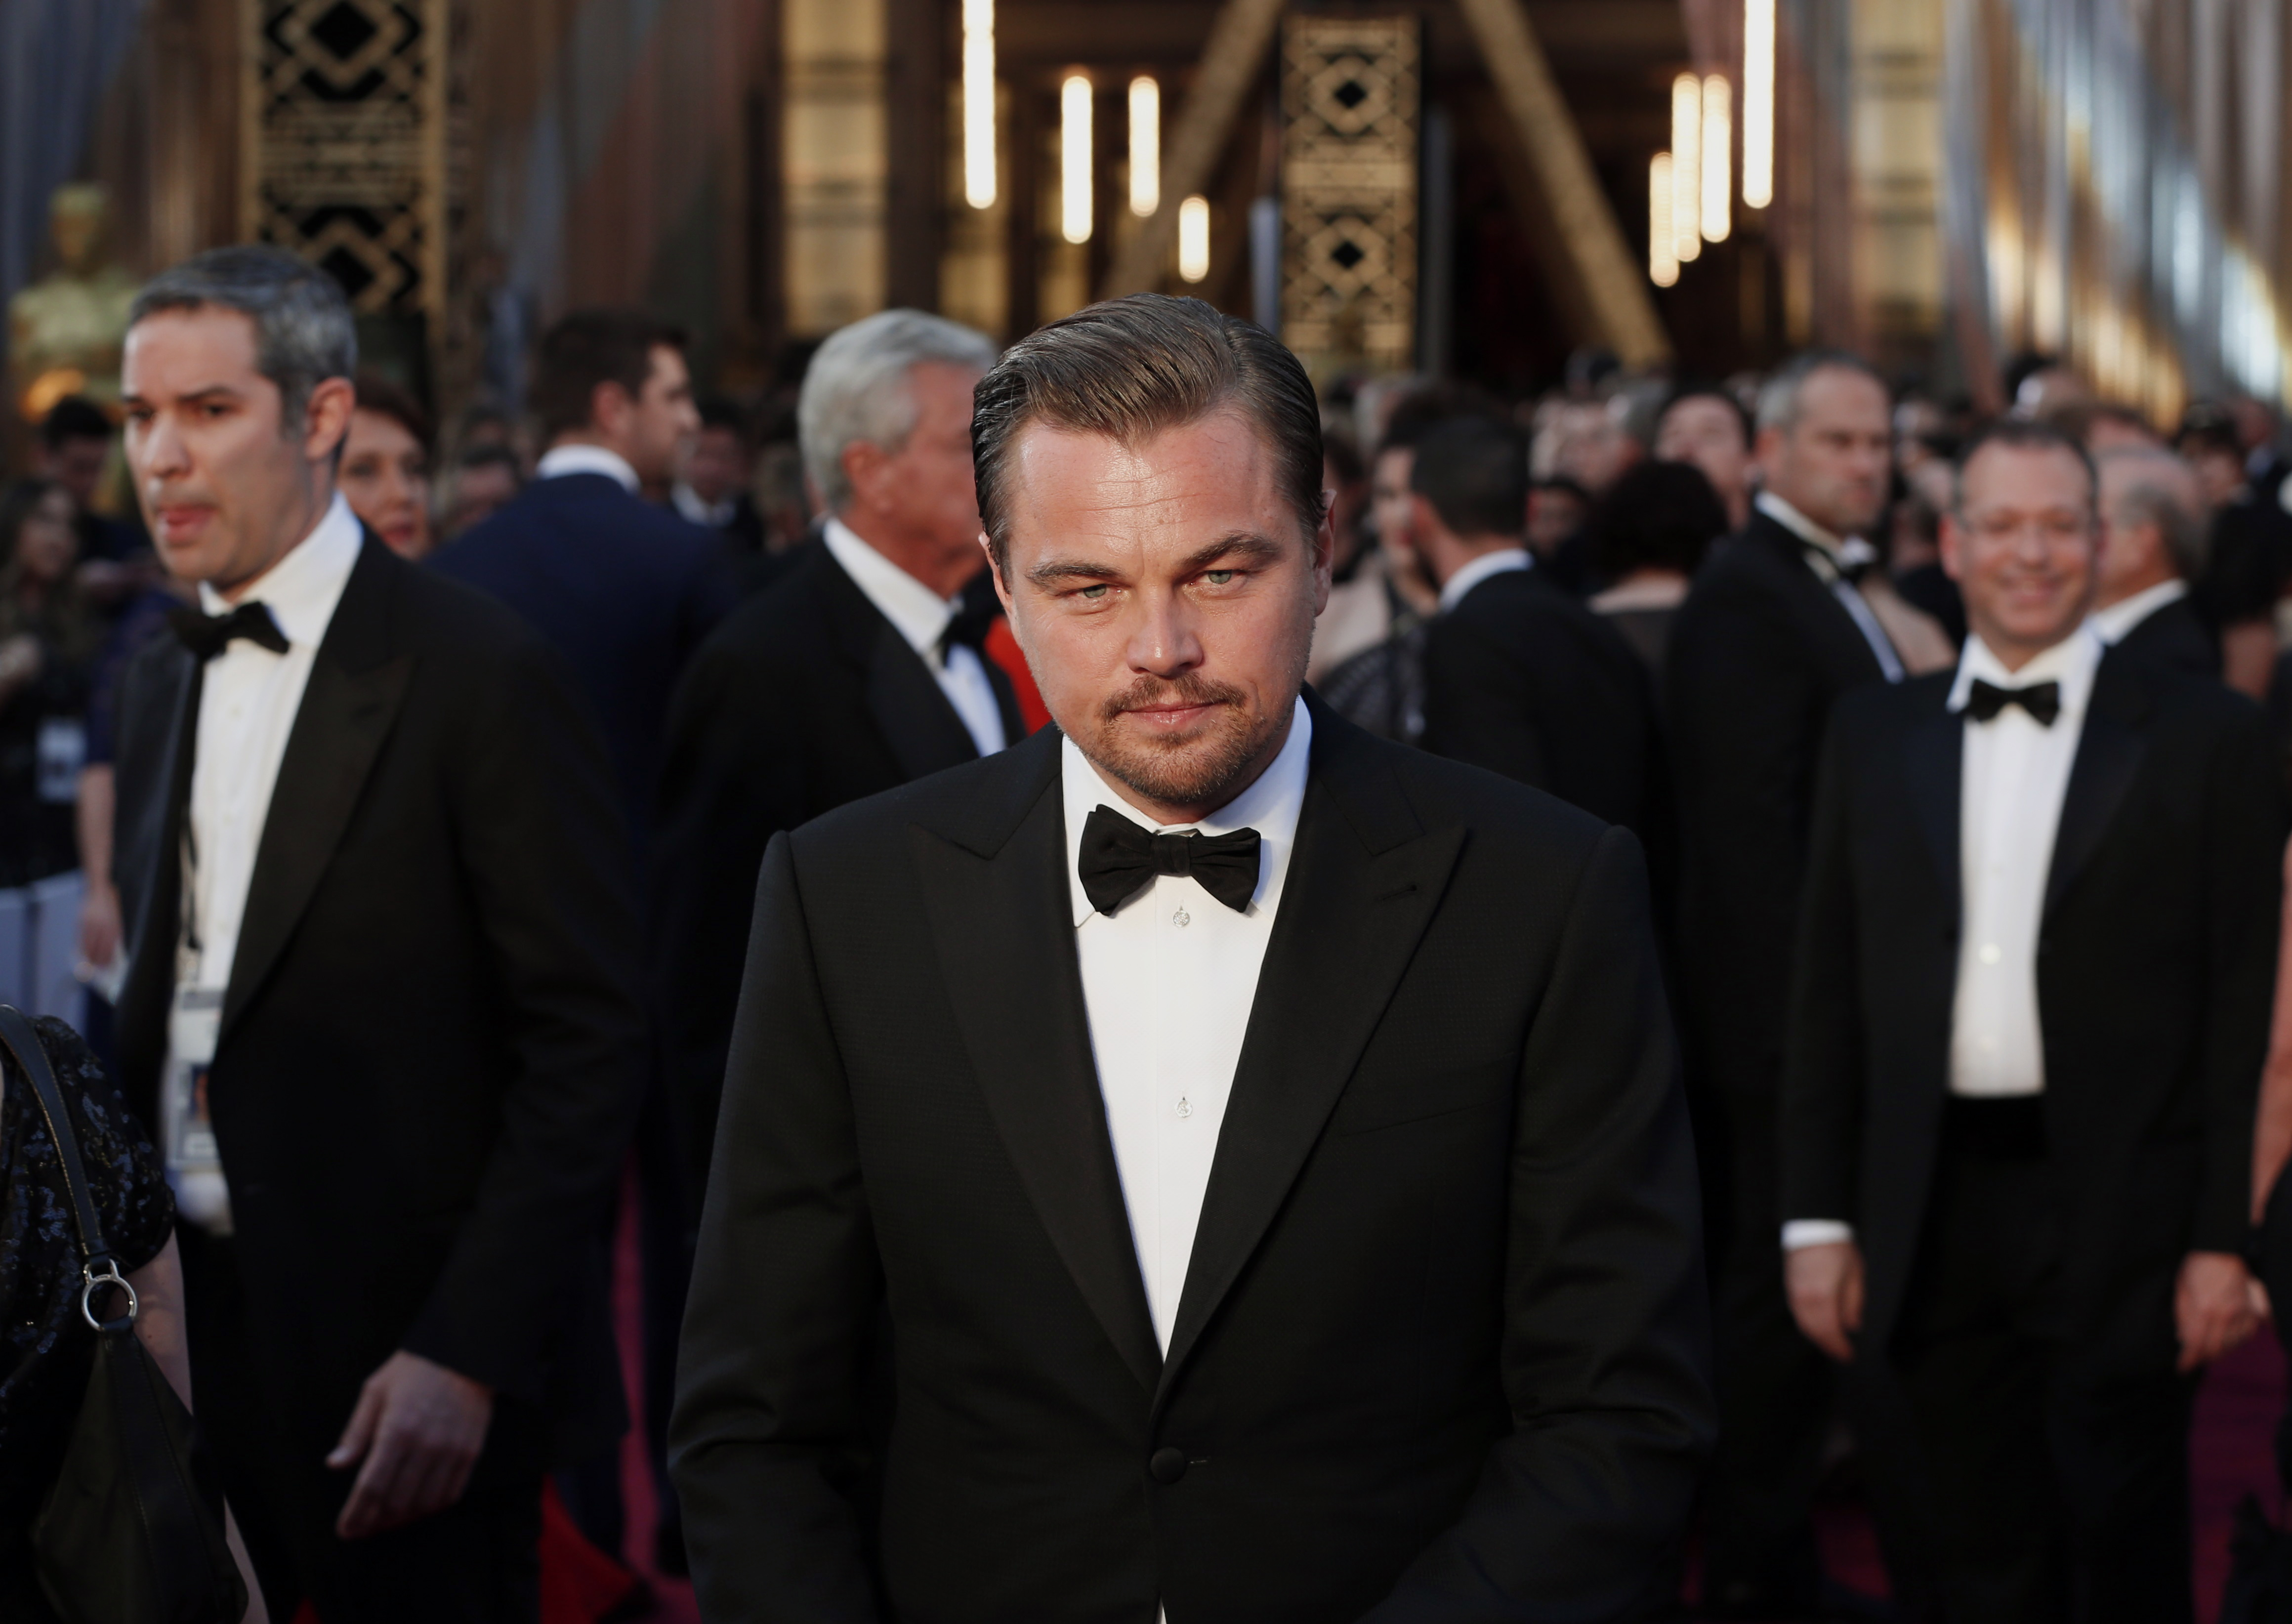 Leonardo DiCaprio, nominated for Best Actor for his role in "The Revenant", wearing a Giorgio Armani tuxedo, arrives at the 88th Academy Awards in Hollywood, California February 28, 2016. REUTERS/Lucas Jackson TPX IMAGES OF THE DAY - RTS8FPC